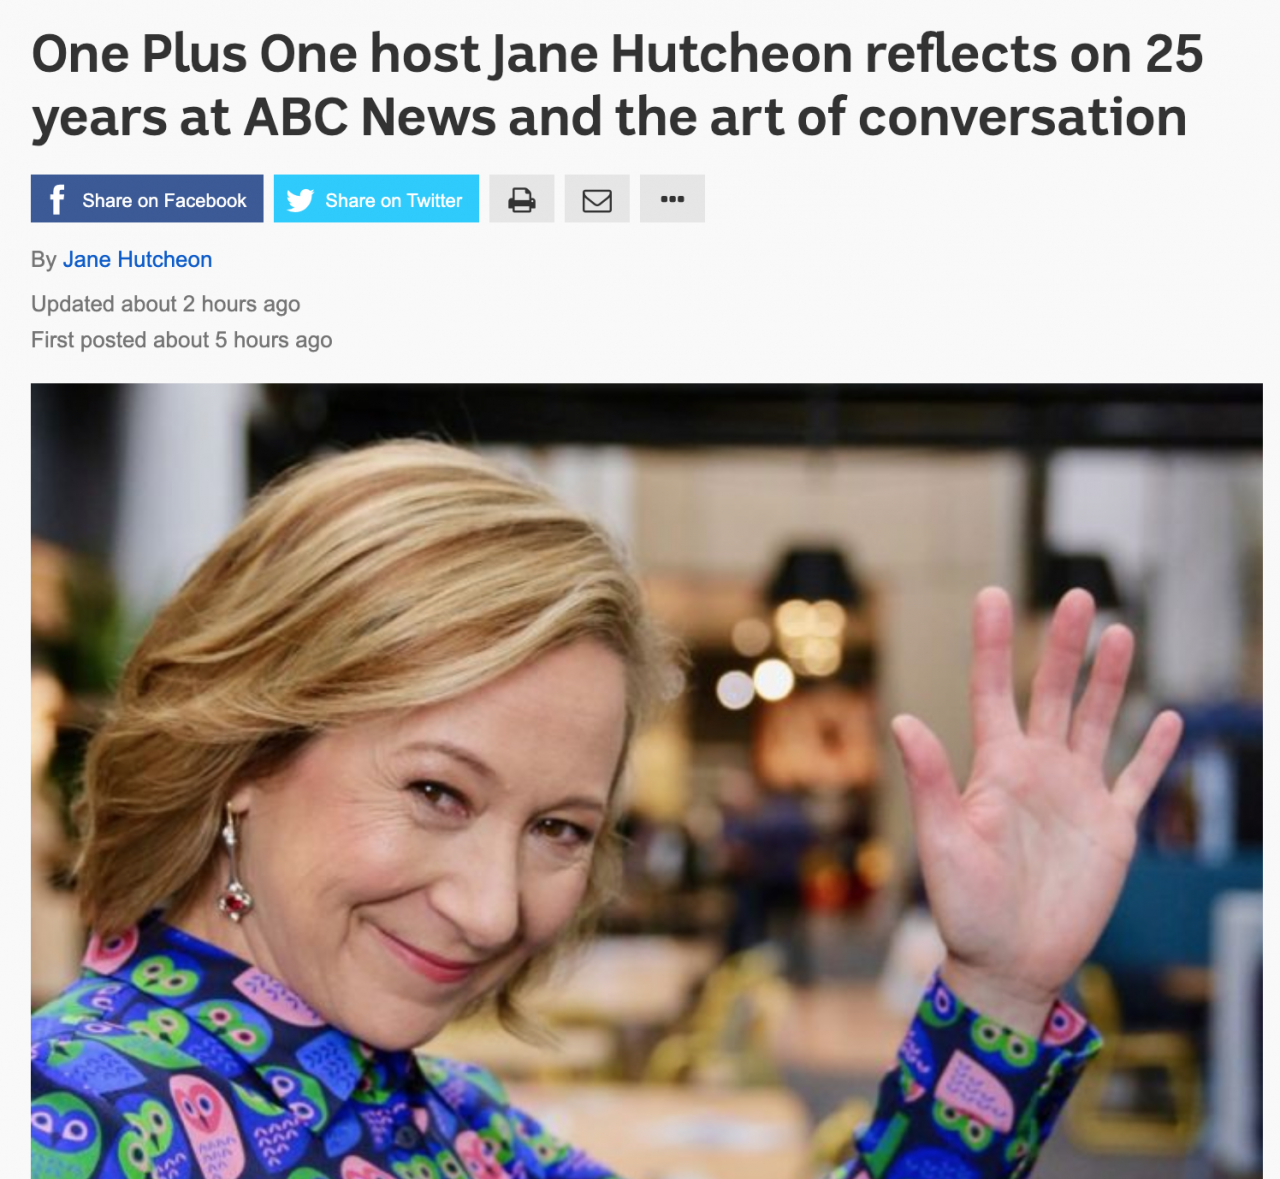 One Plus One host Jane Hutcheon reflects on 25 years at ABC News and the art of conversation